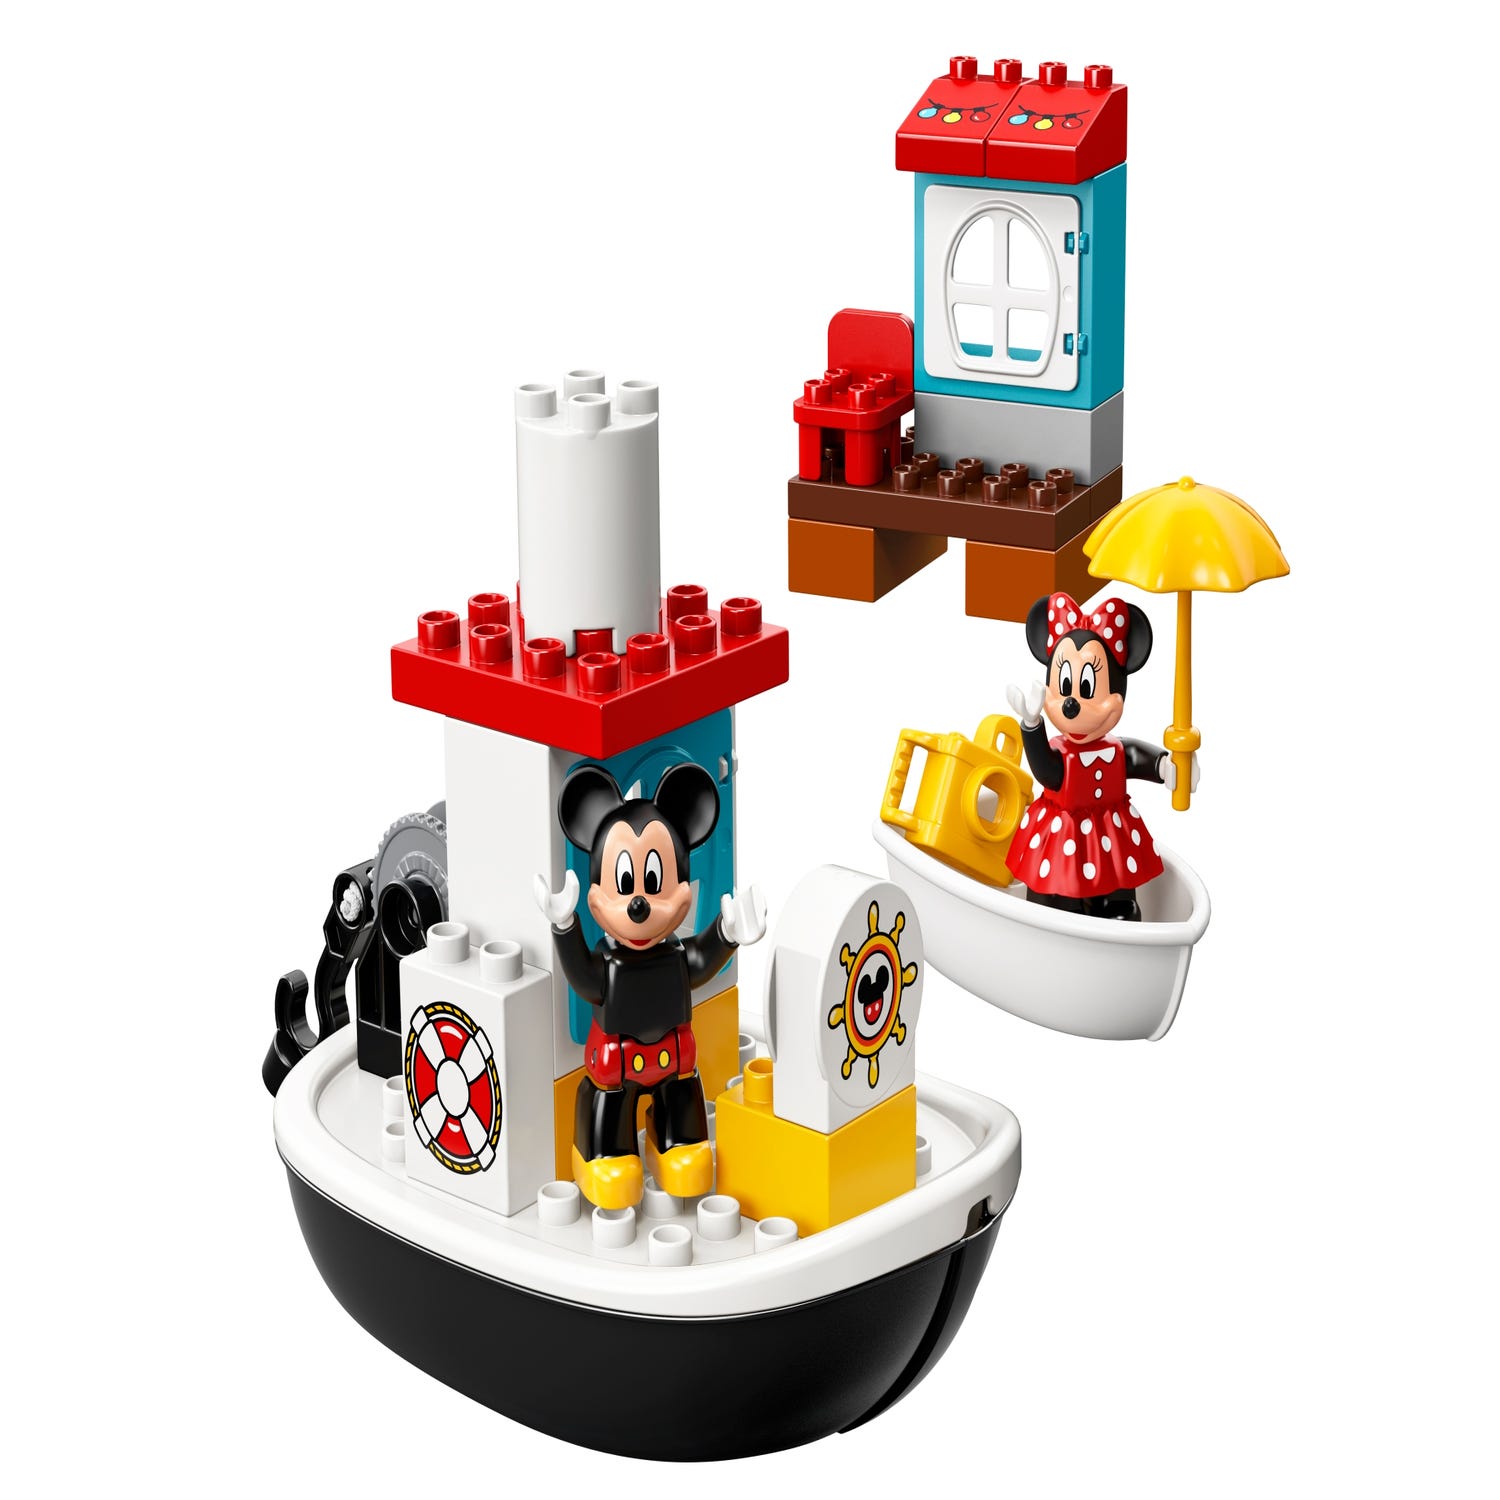 Mickey's Boat 10881 | | Buy online at the Official LEGO® Shop US